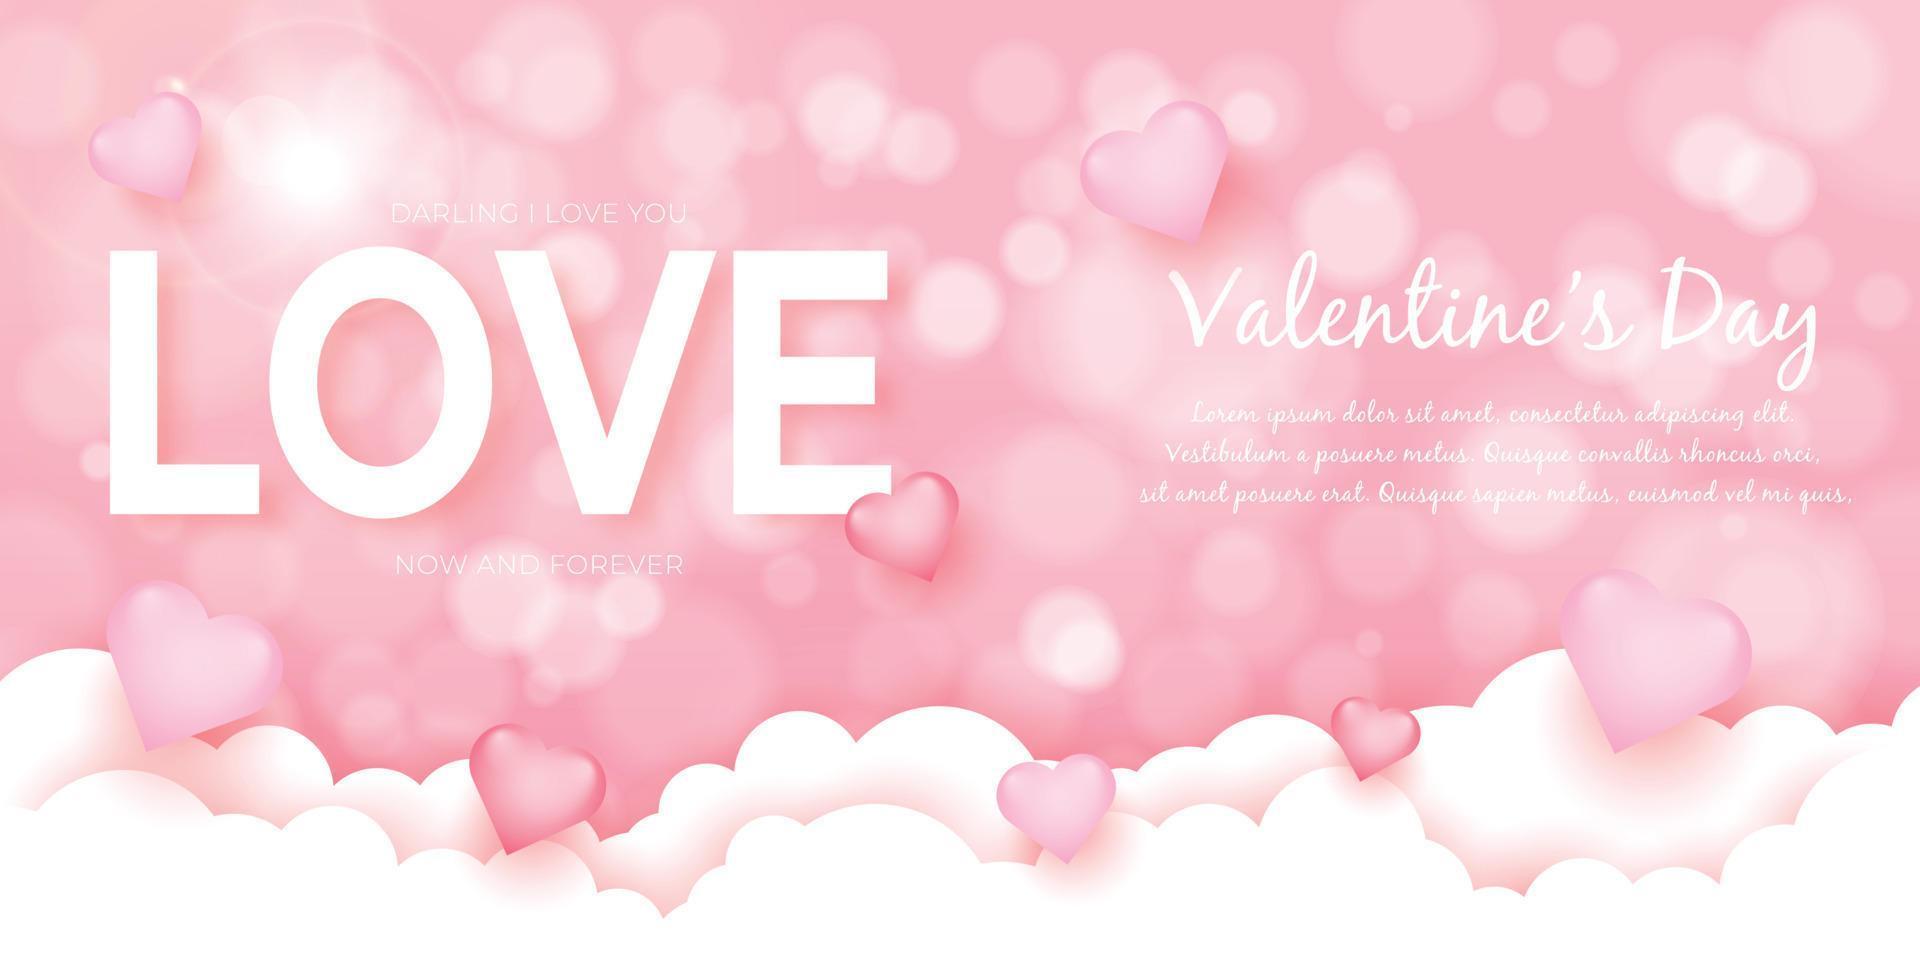 valentine's day banner with sayings dear i love you now and forever and hearts on clouds vector